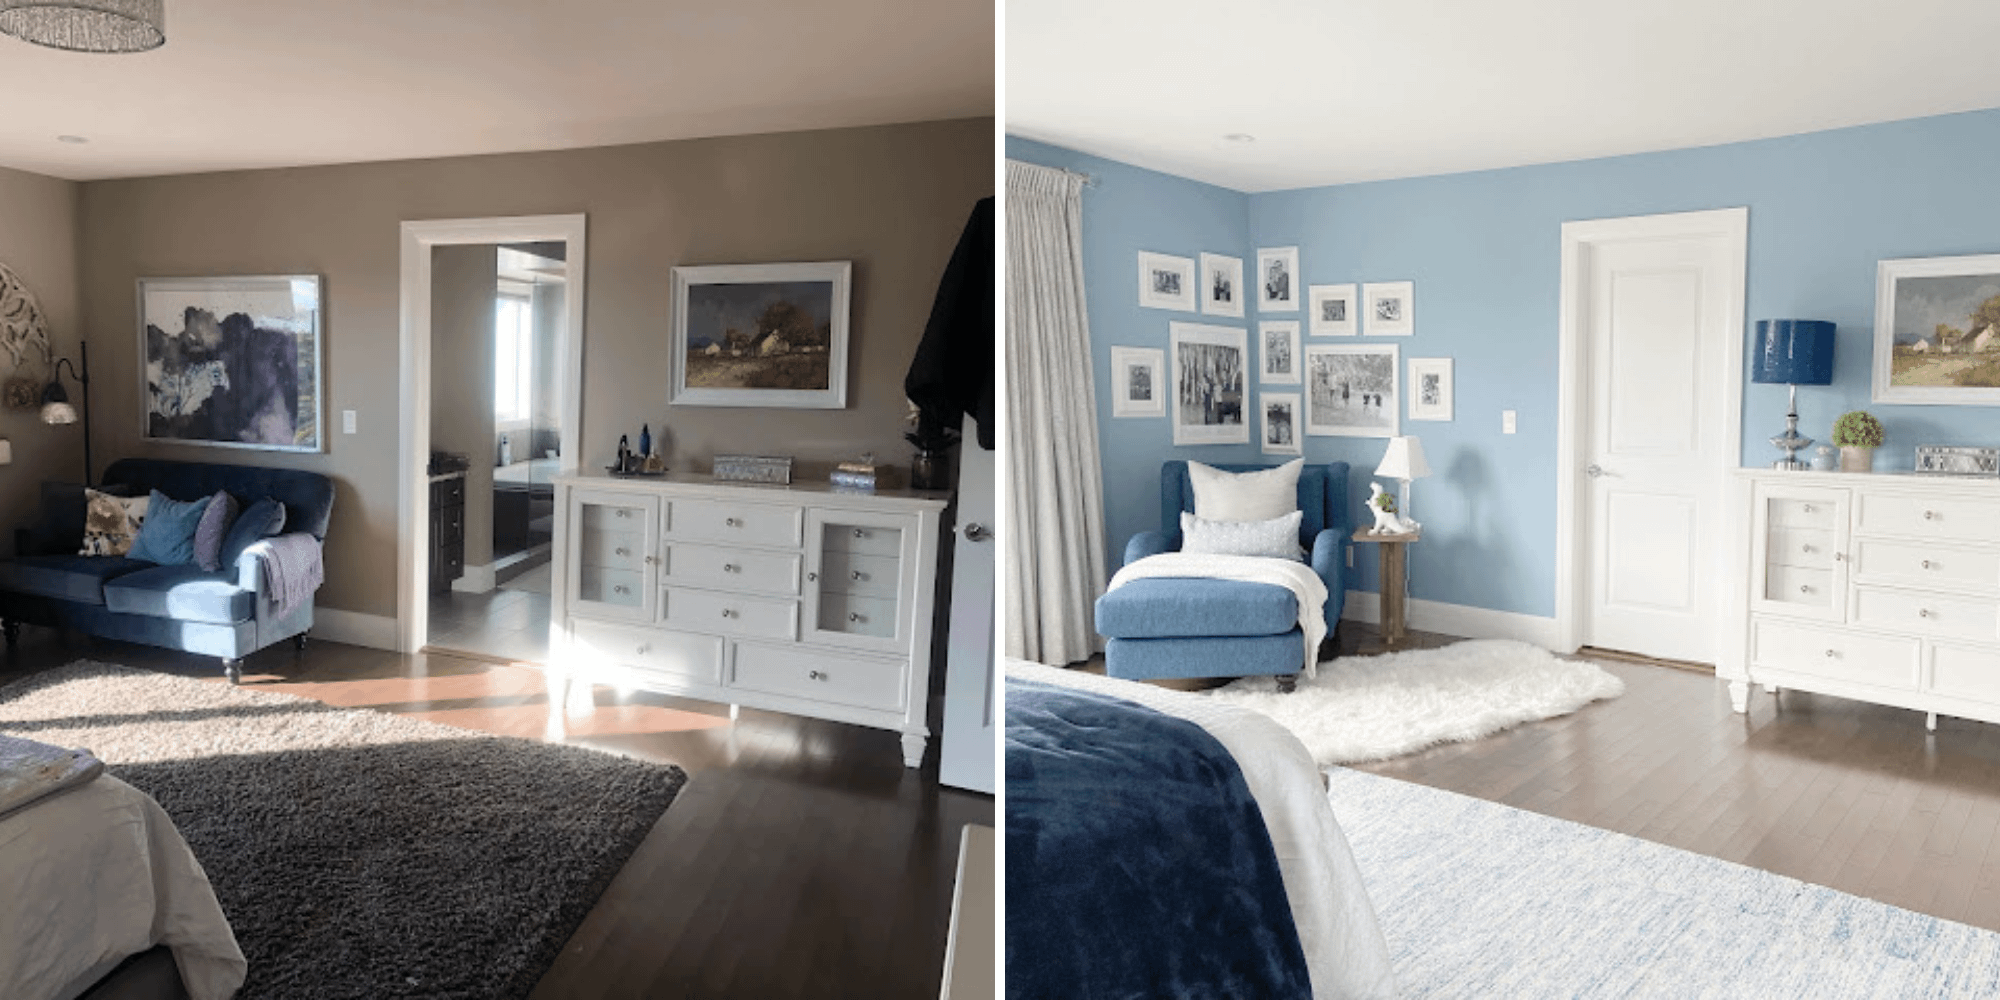 Before and after of a cozy bedroom redesign.